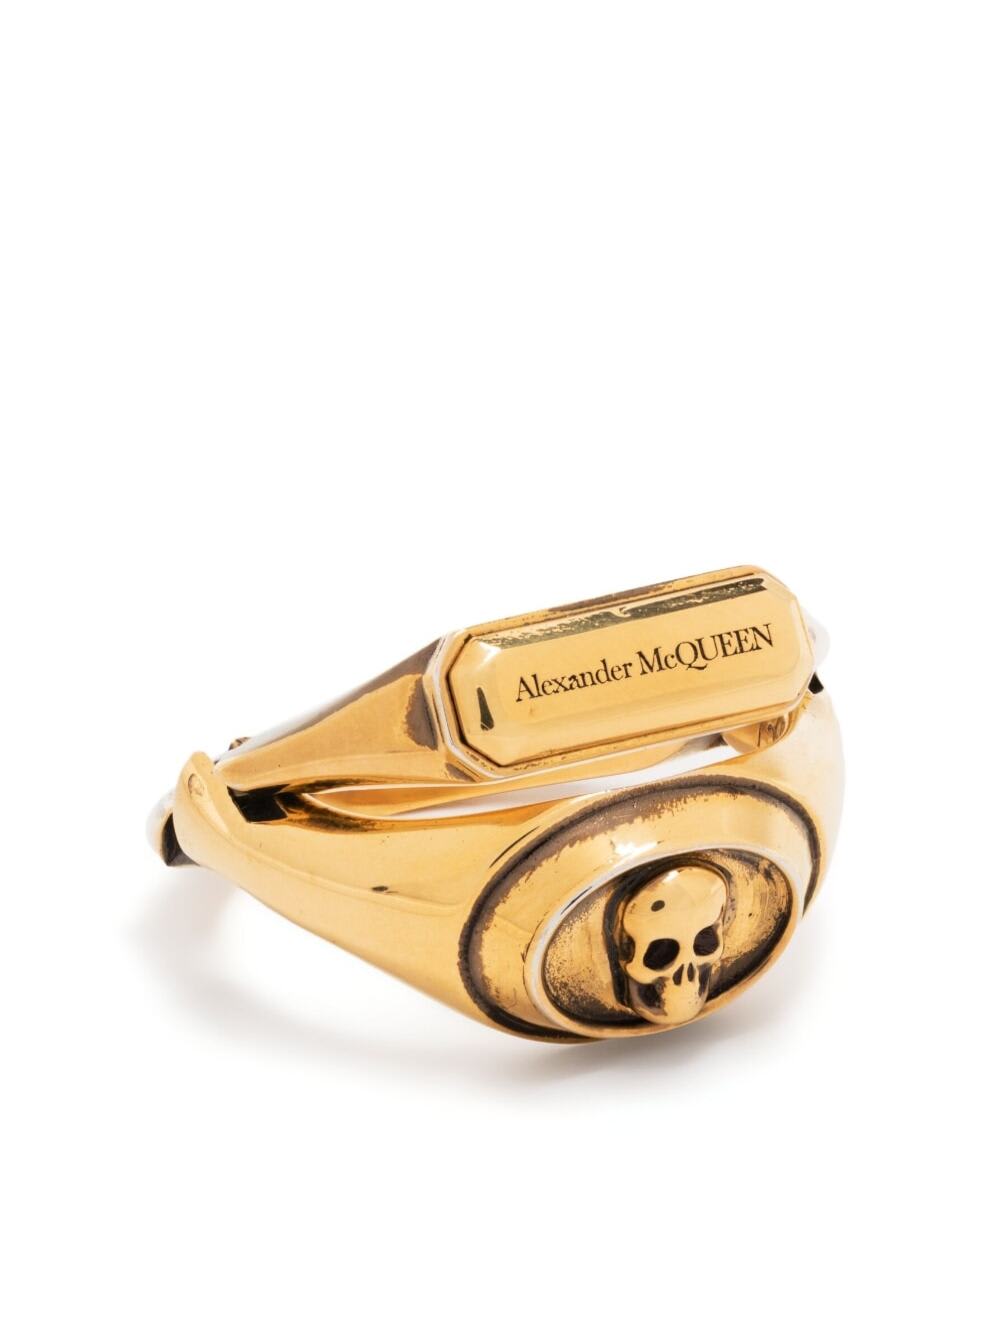 ALEXANDER MCQUEEN GOLD-COLORED DOUBLE RING WITH SKULL DETAIL AND EMBOSSED LOGO LETTERING IN BRASS WOMAN